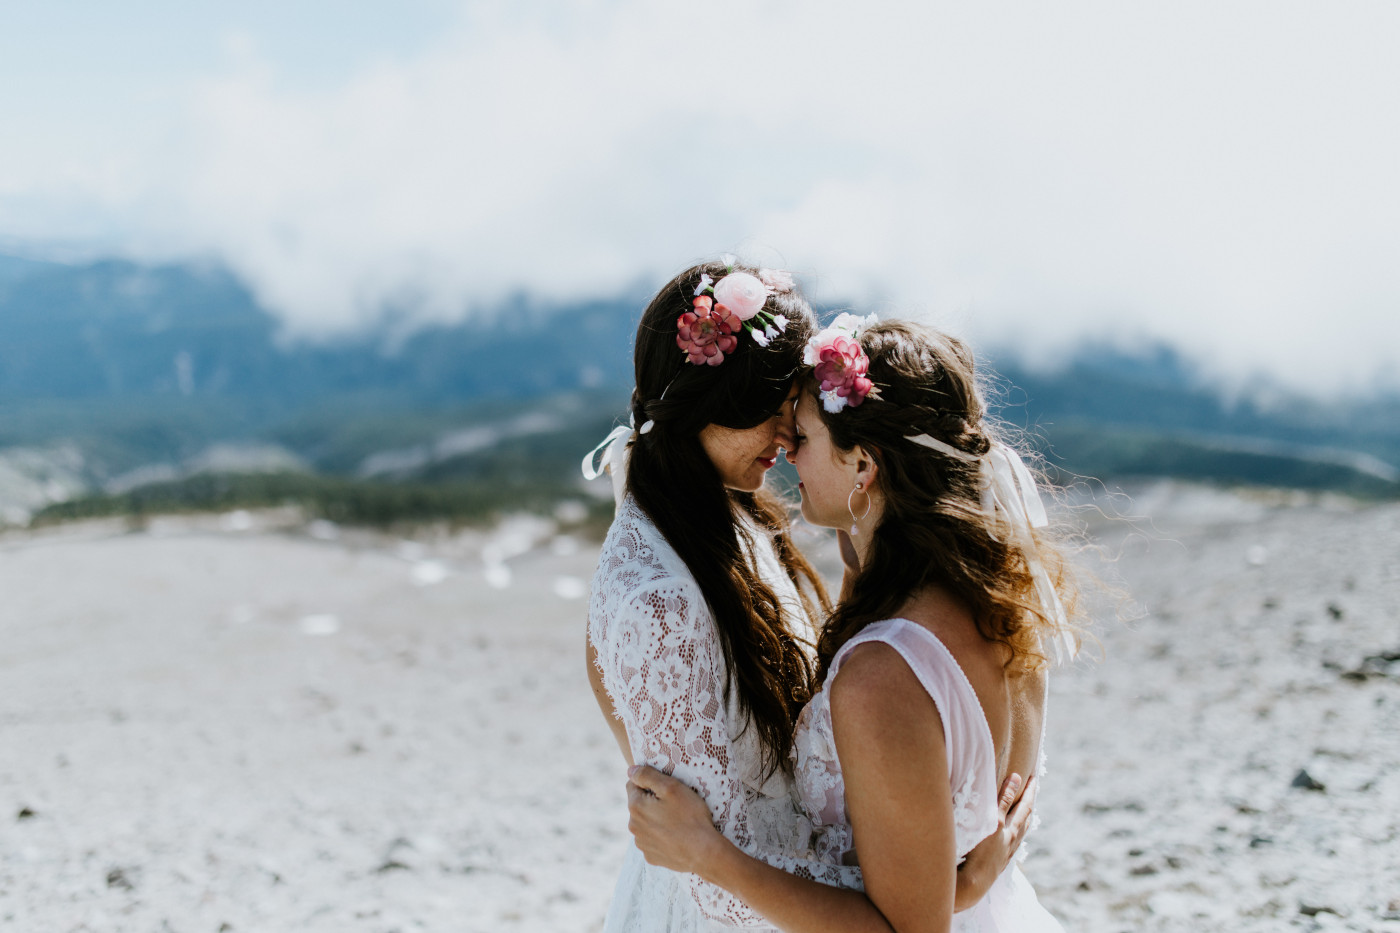 Margaux keeps her hand on Heather's back. Elopement photography at Mount Hood by Sienna Plus Josh.